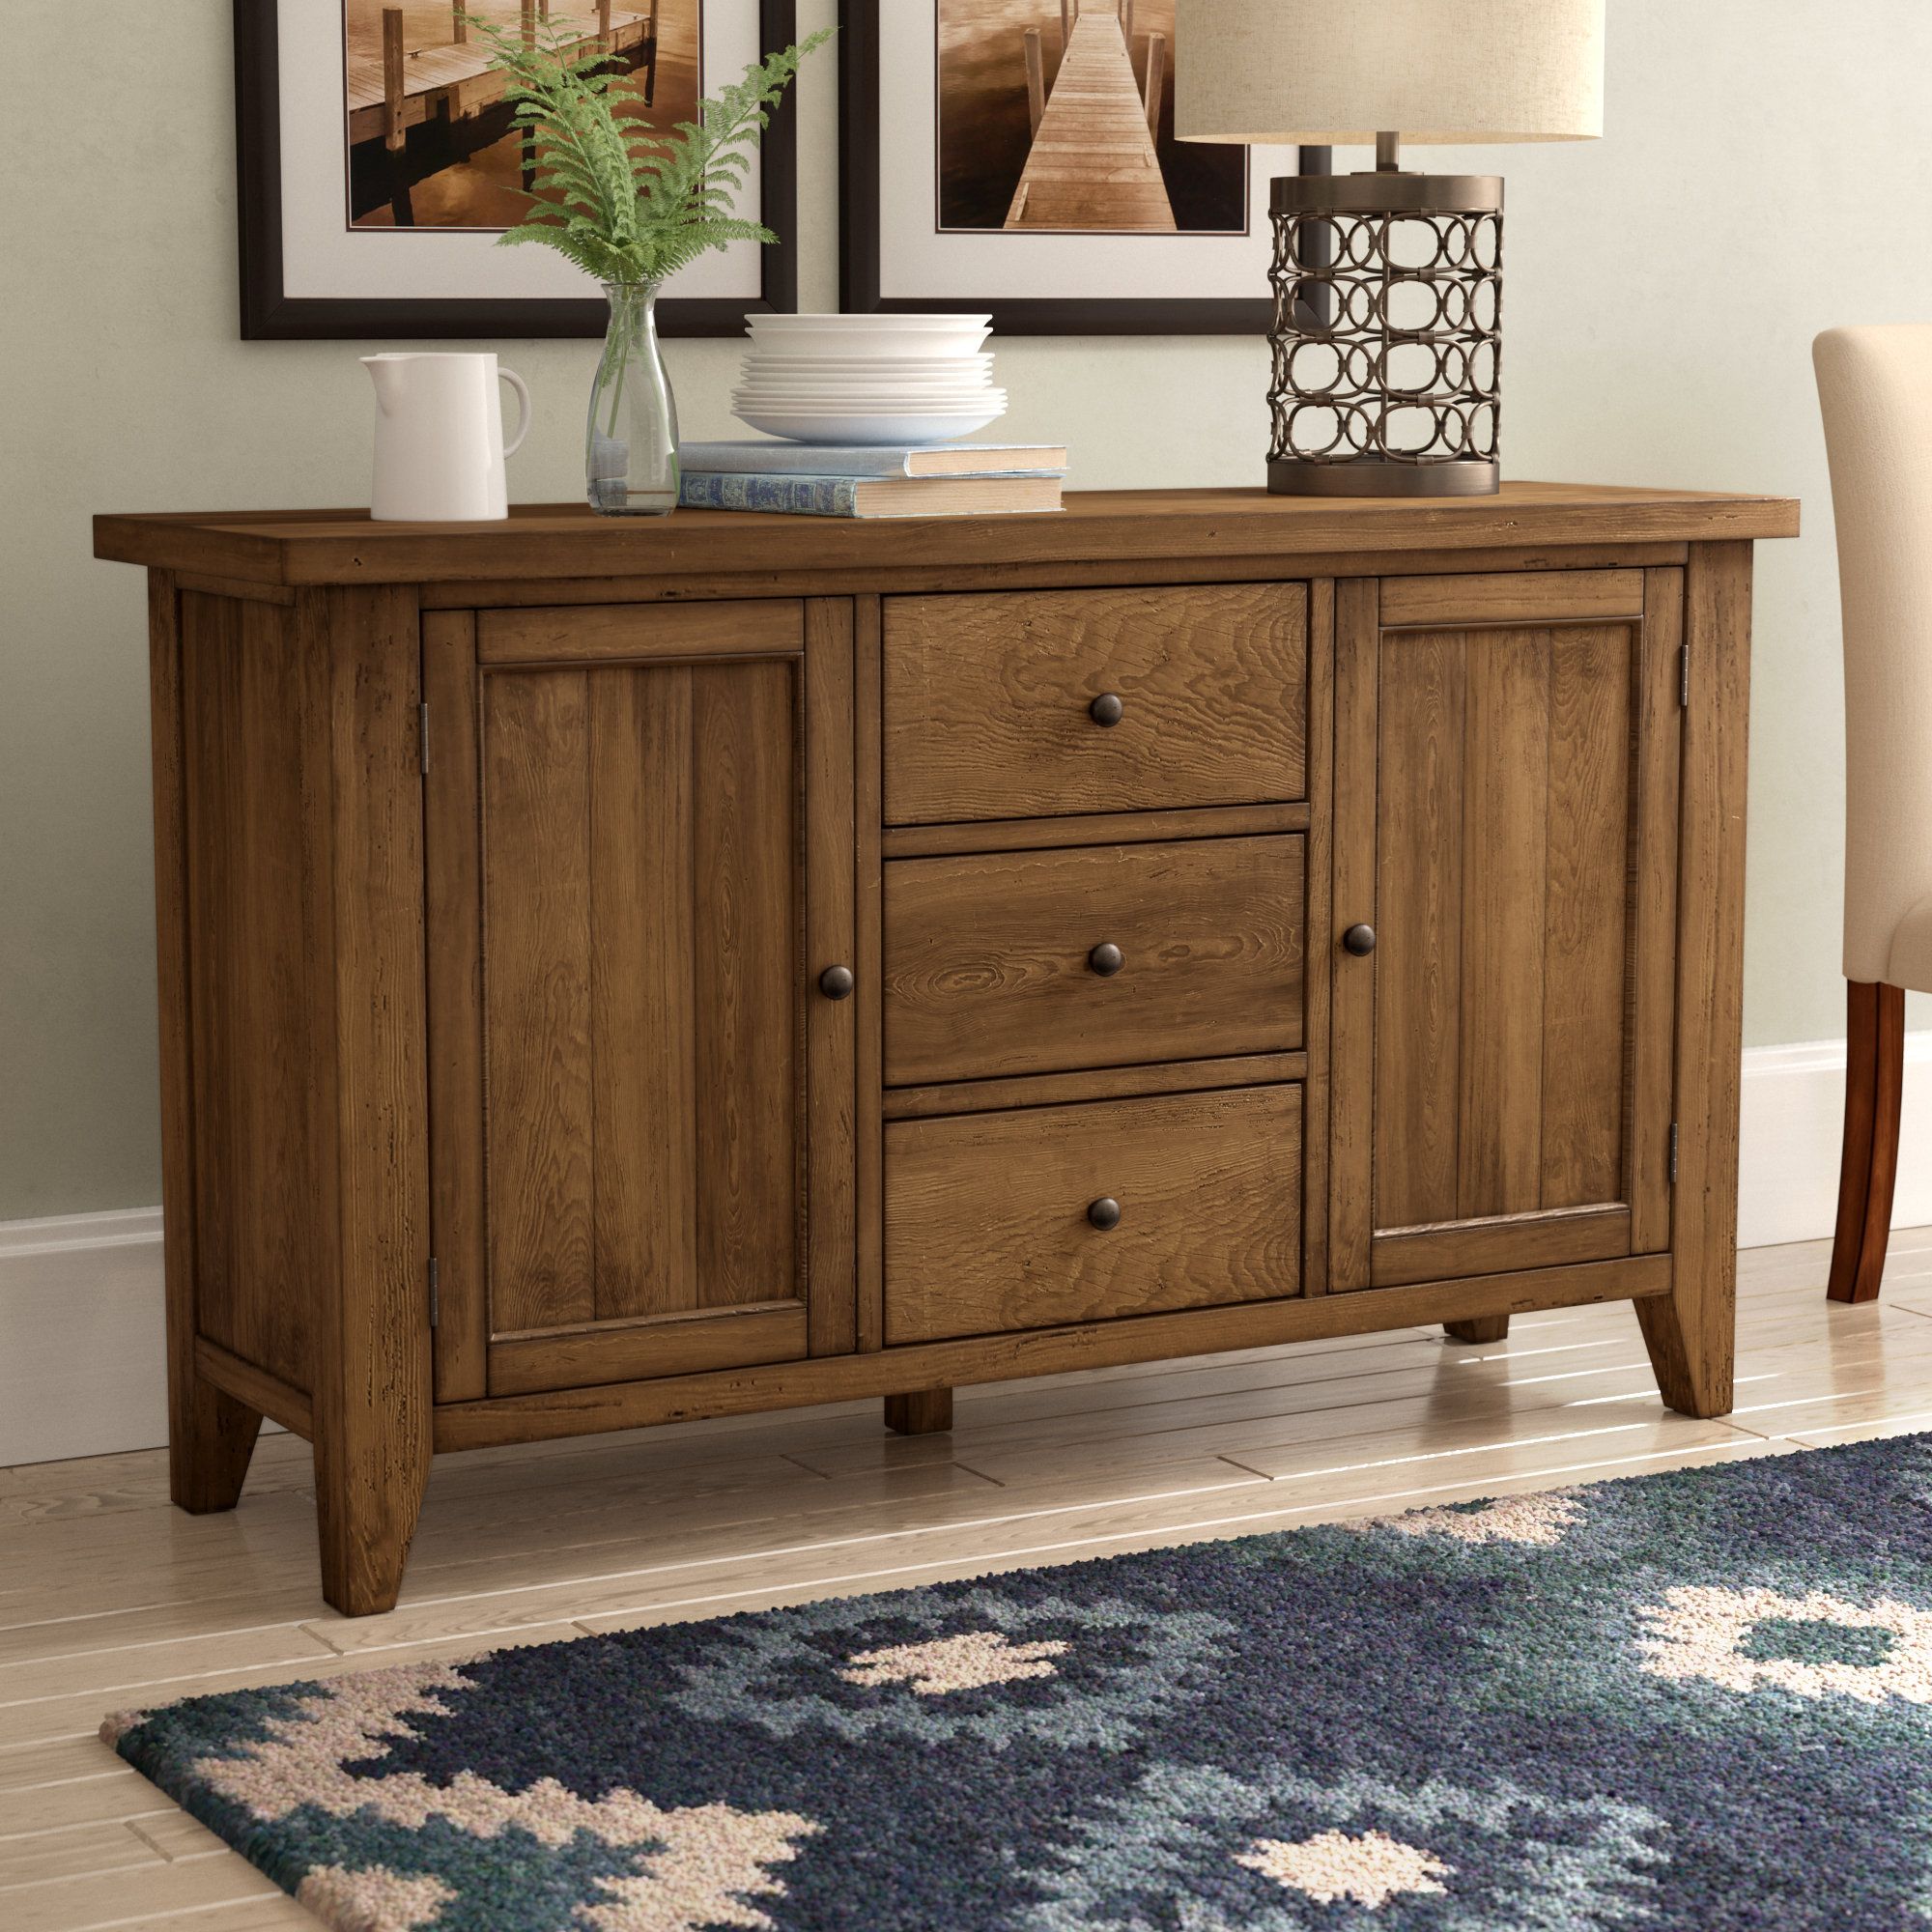 Warkentin Sideboard With Regard To Current Nashoba Sideboards (View 4 of 20)